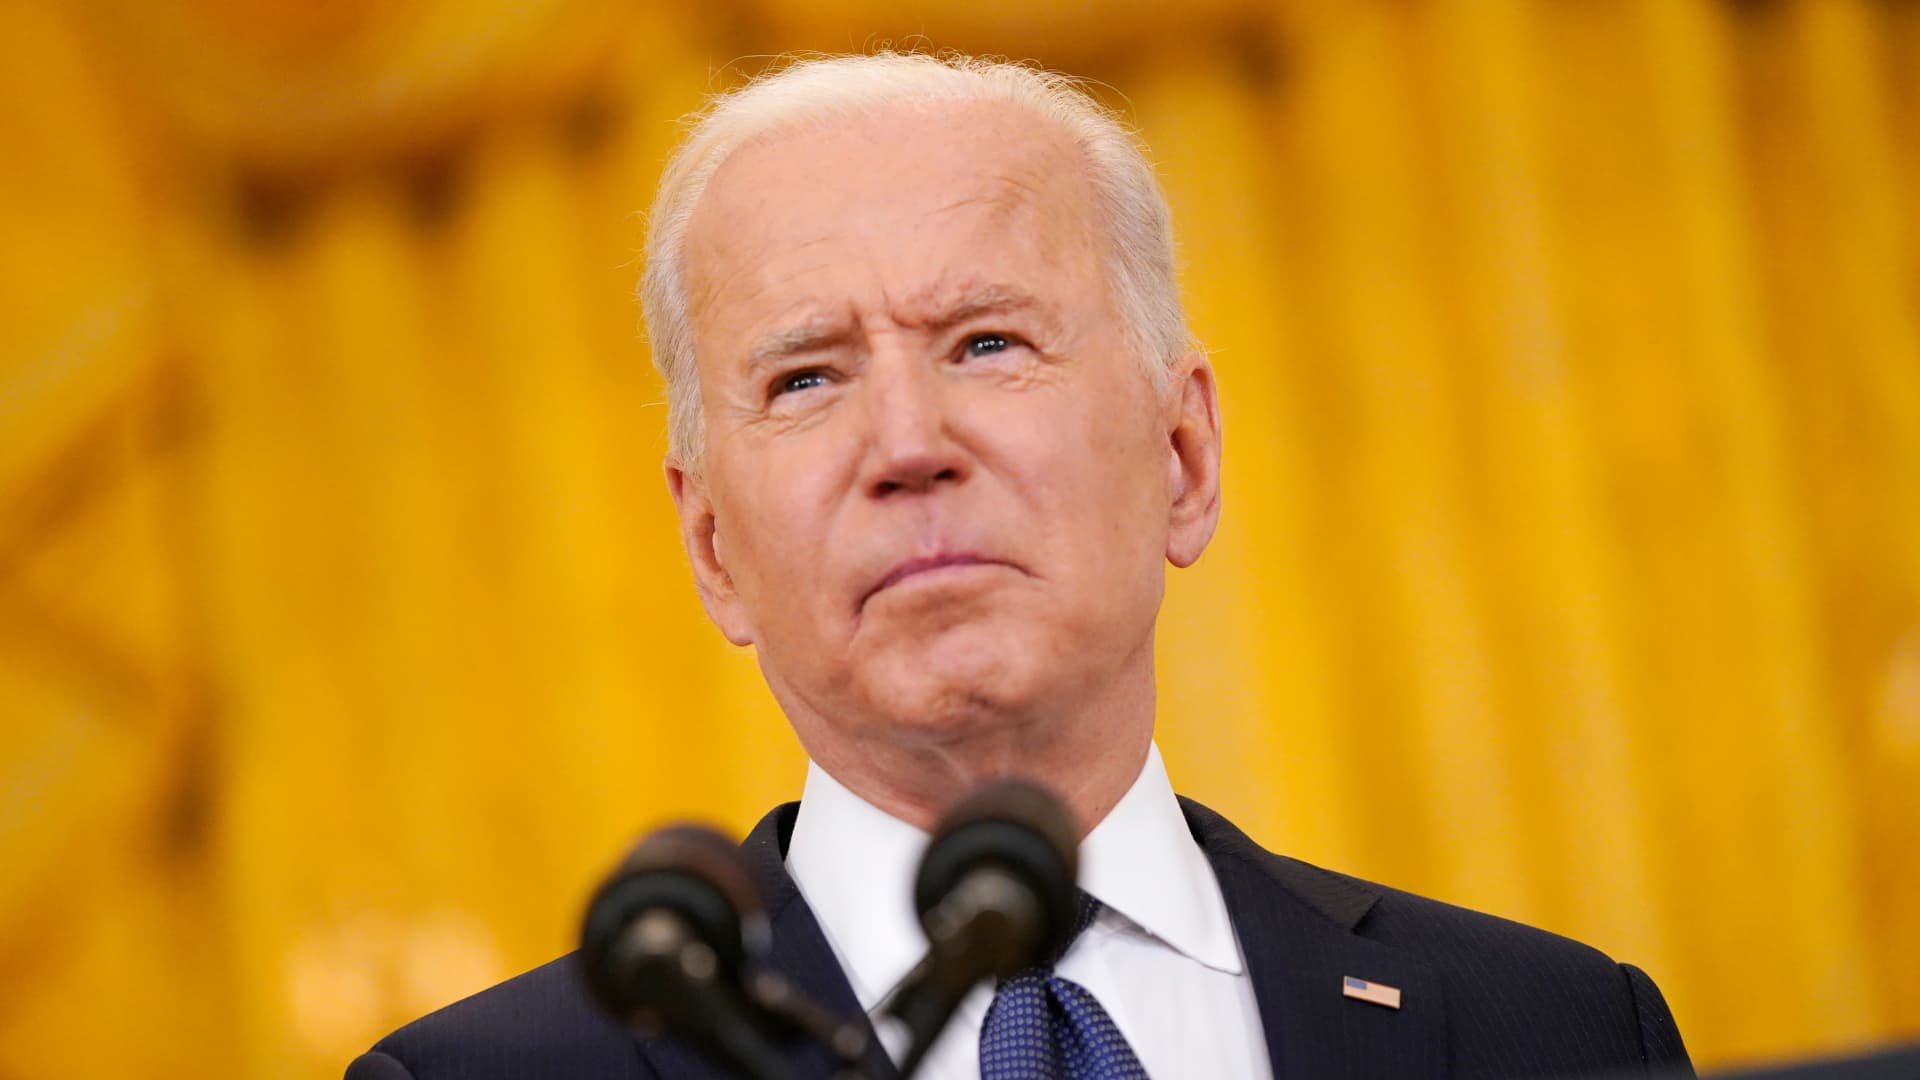 President Joe Biden pauses while speaking in the East Room of the White House in Washington, D.C., U.S., on Monday, May 10, 2021.